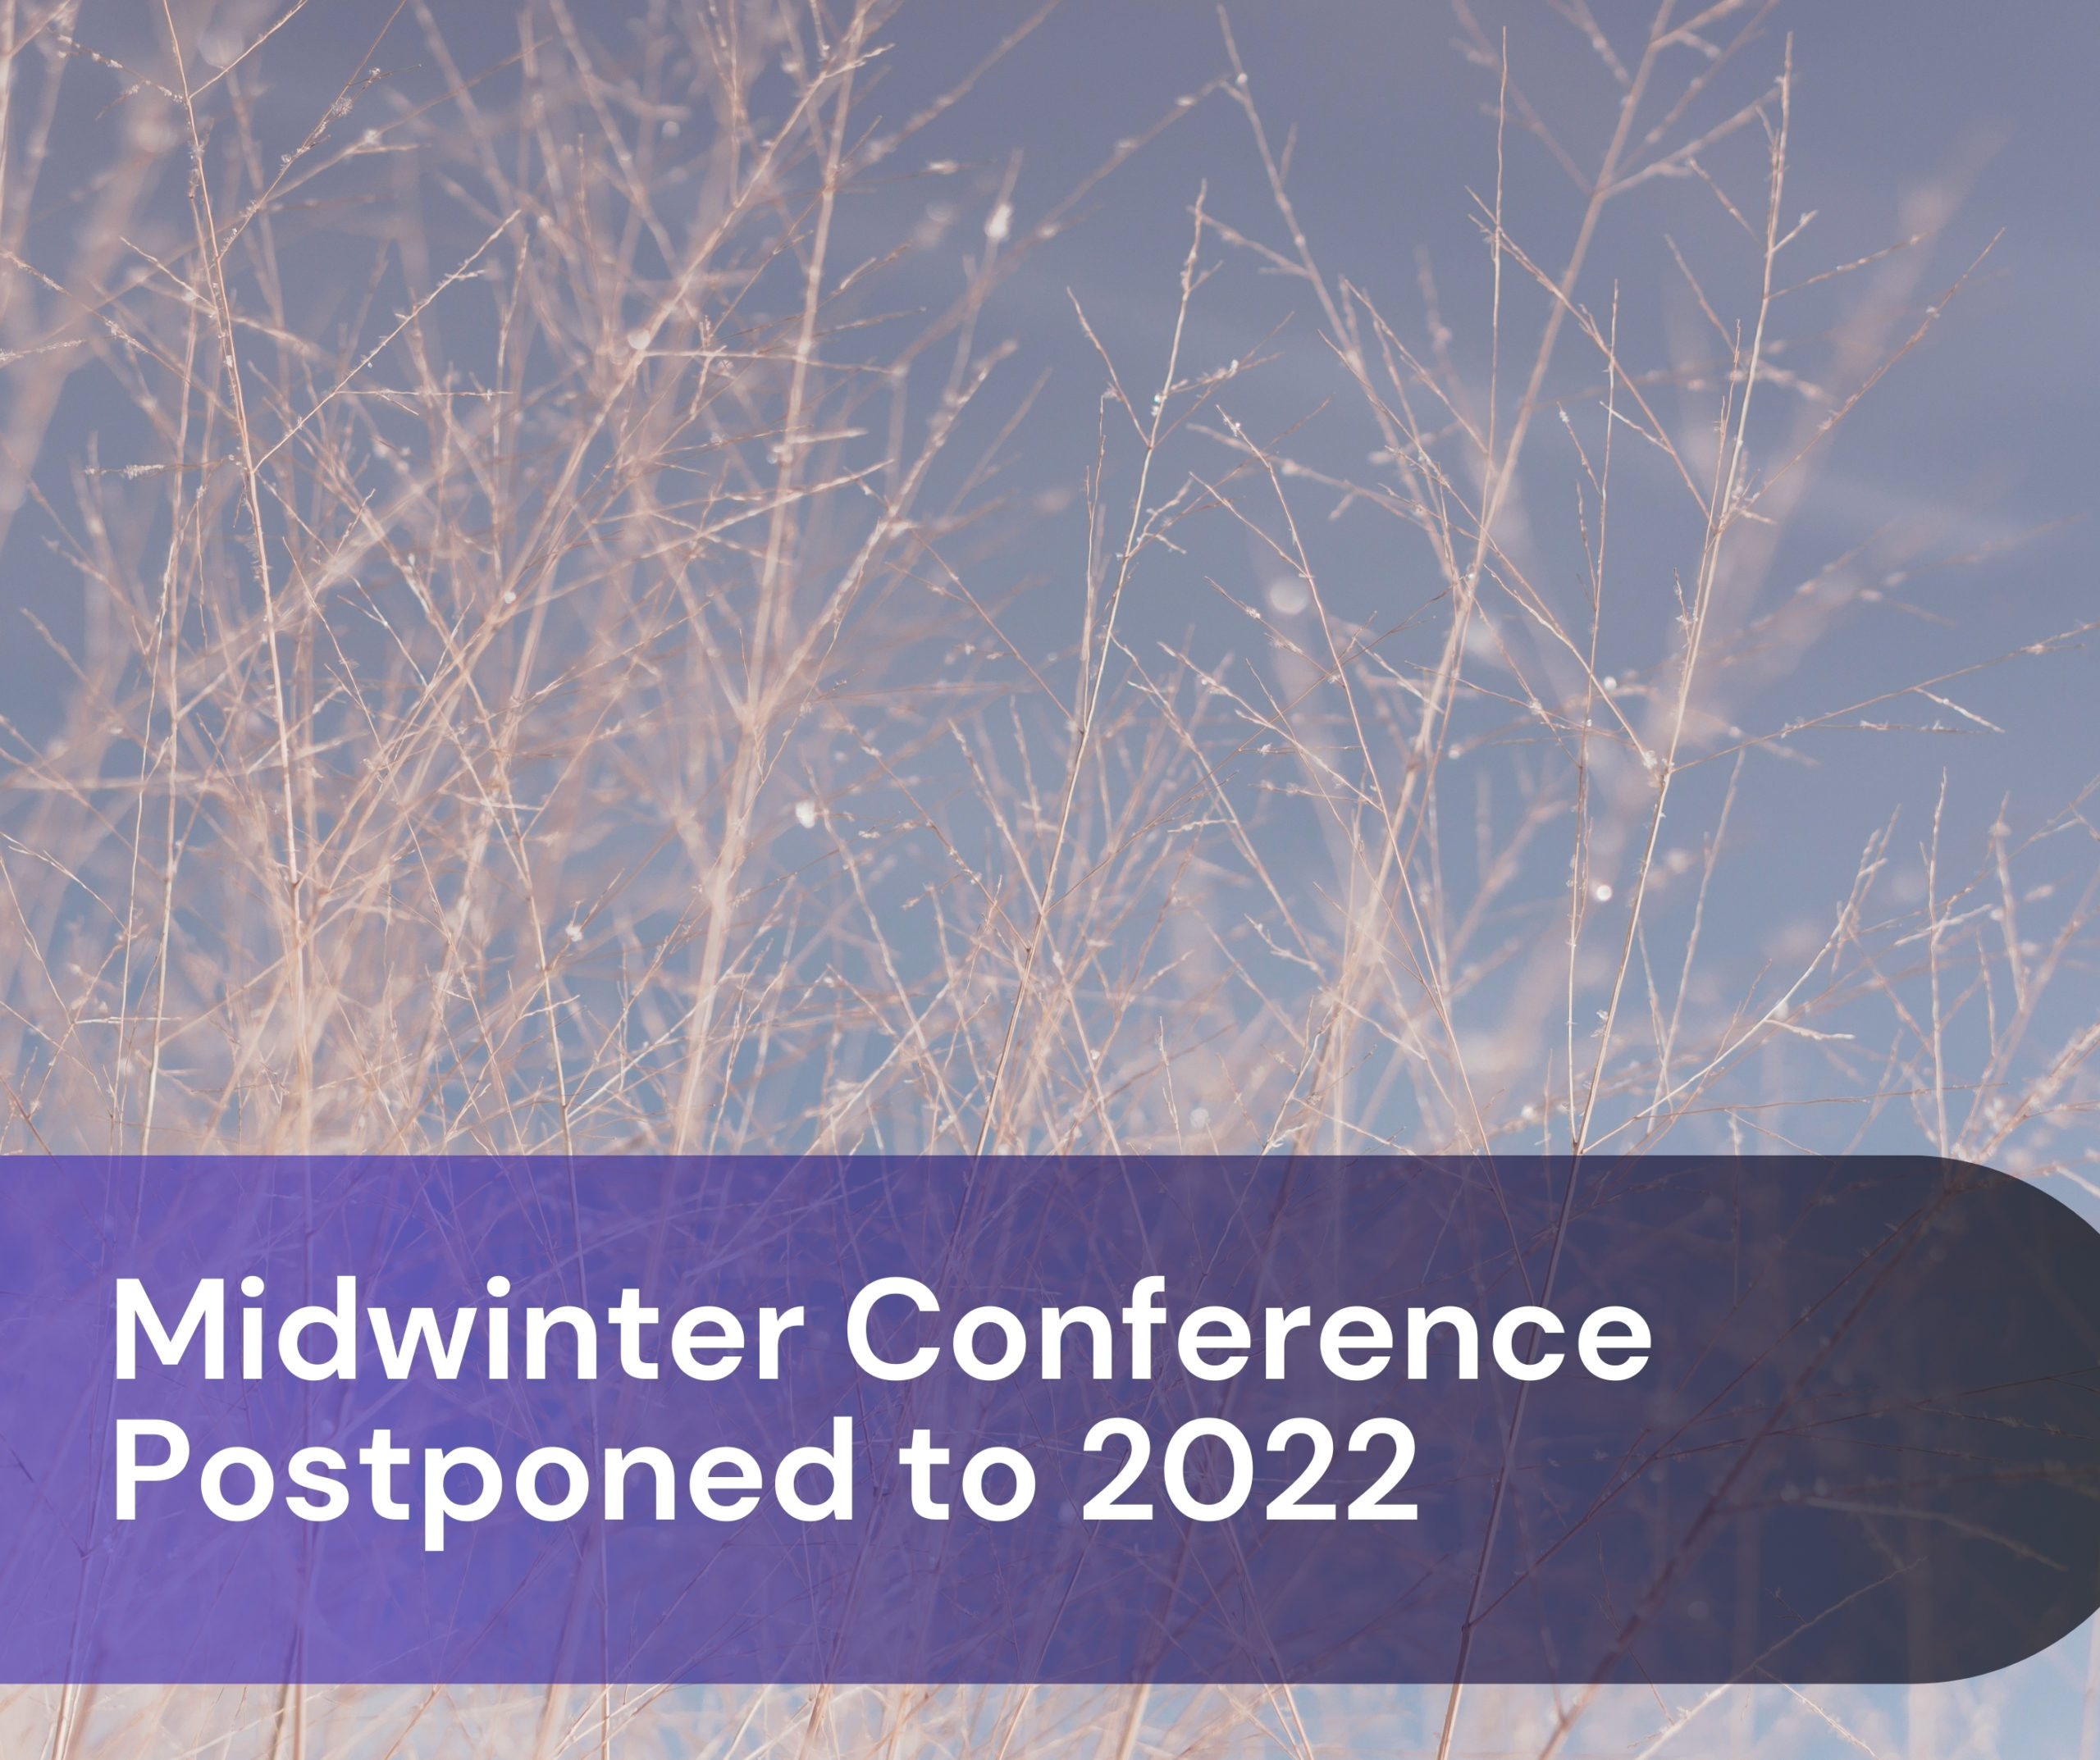 ECC Midwinter Conference Postponed to 2022